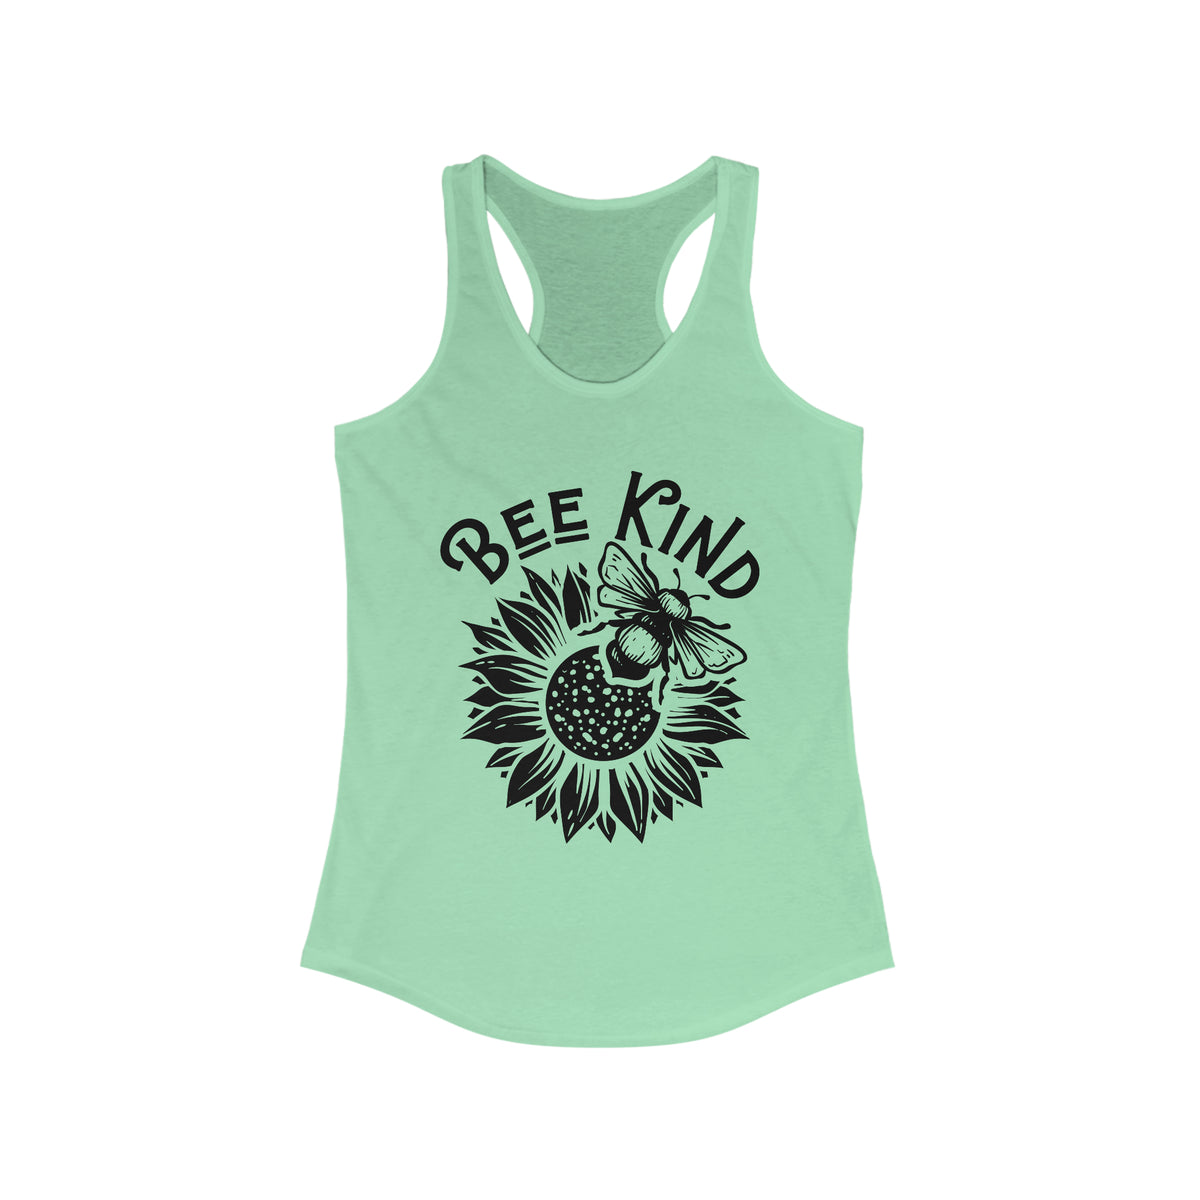 Be Kind Cute Bee Shirt | Bee Kind Sunflower Shirt | Nature Lover Gift for Her | Kindness Shirt | Women's Slim Fit Racerback Tank